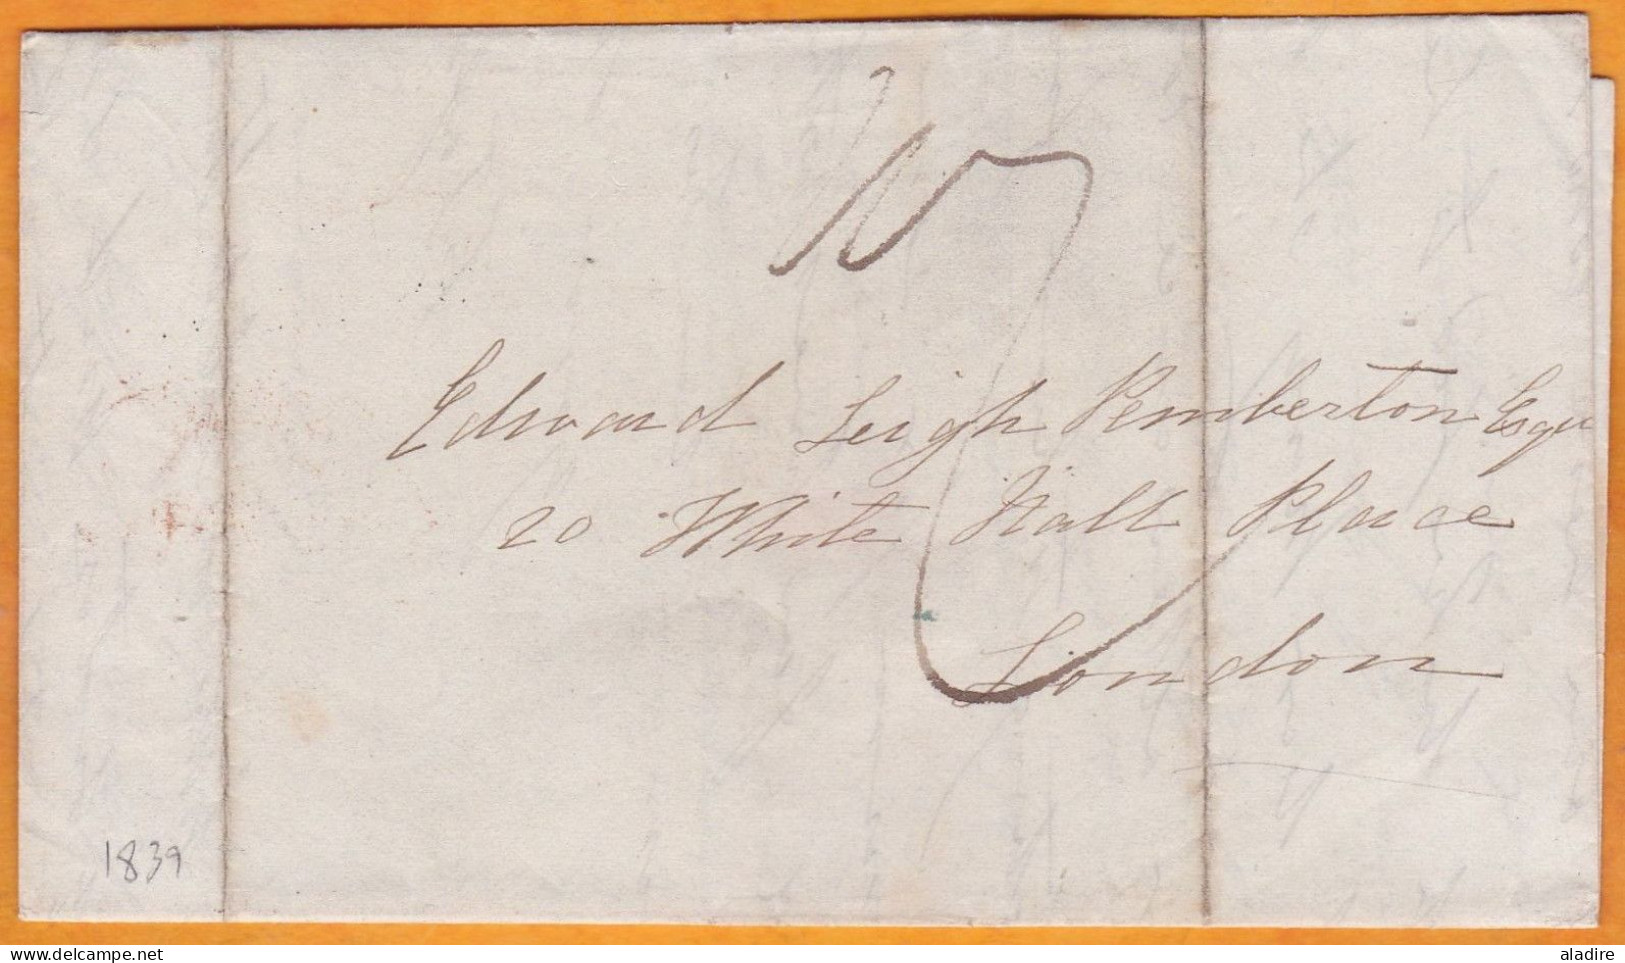 1839 - QV - LIVERPOOL Folded SHIP LETTER To London - Arrival Stamp - Lettre Maritime Liverpool Vers London, Angleterre - Postmark Collection